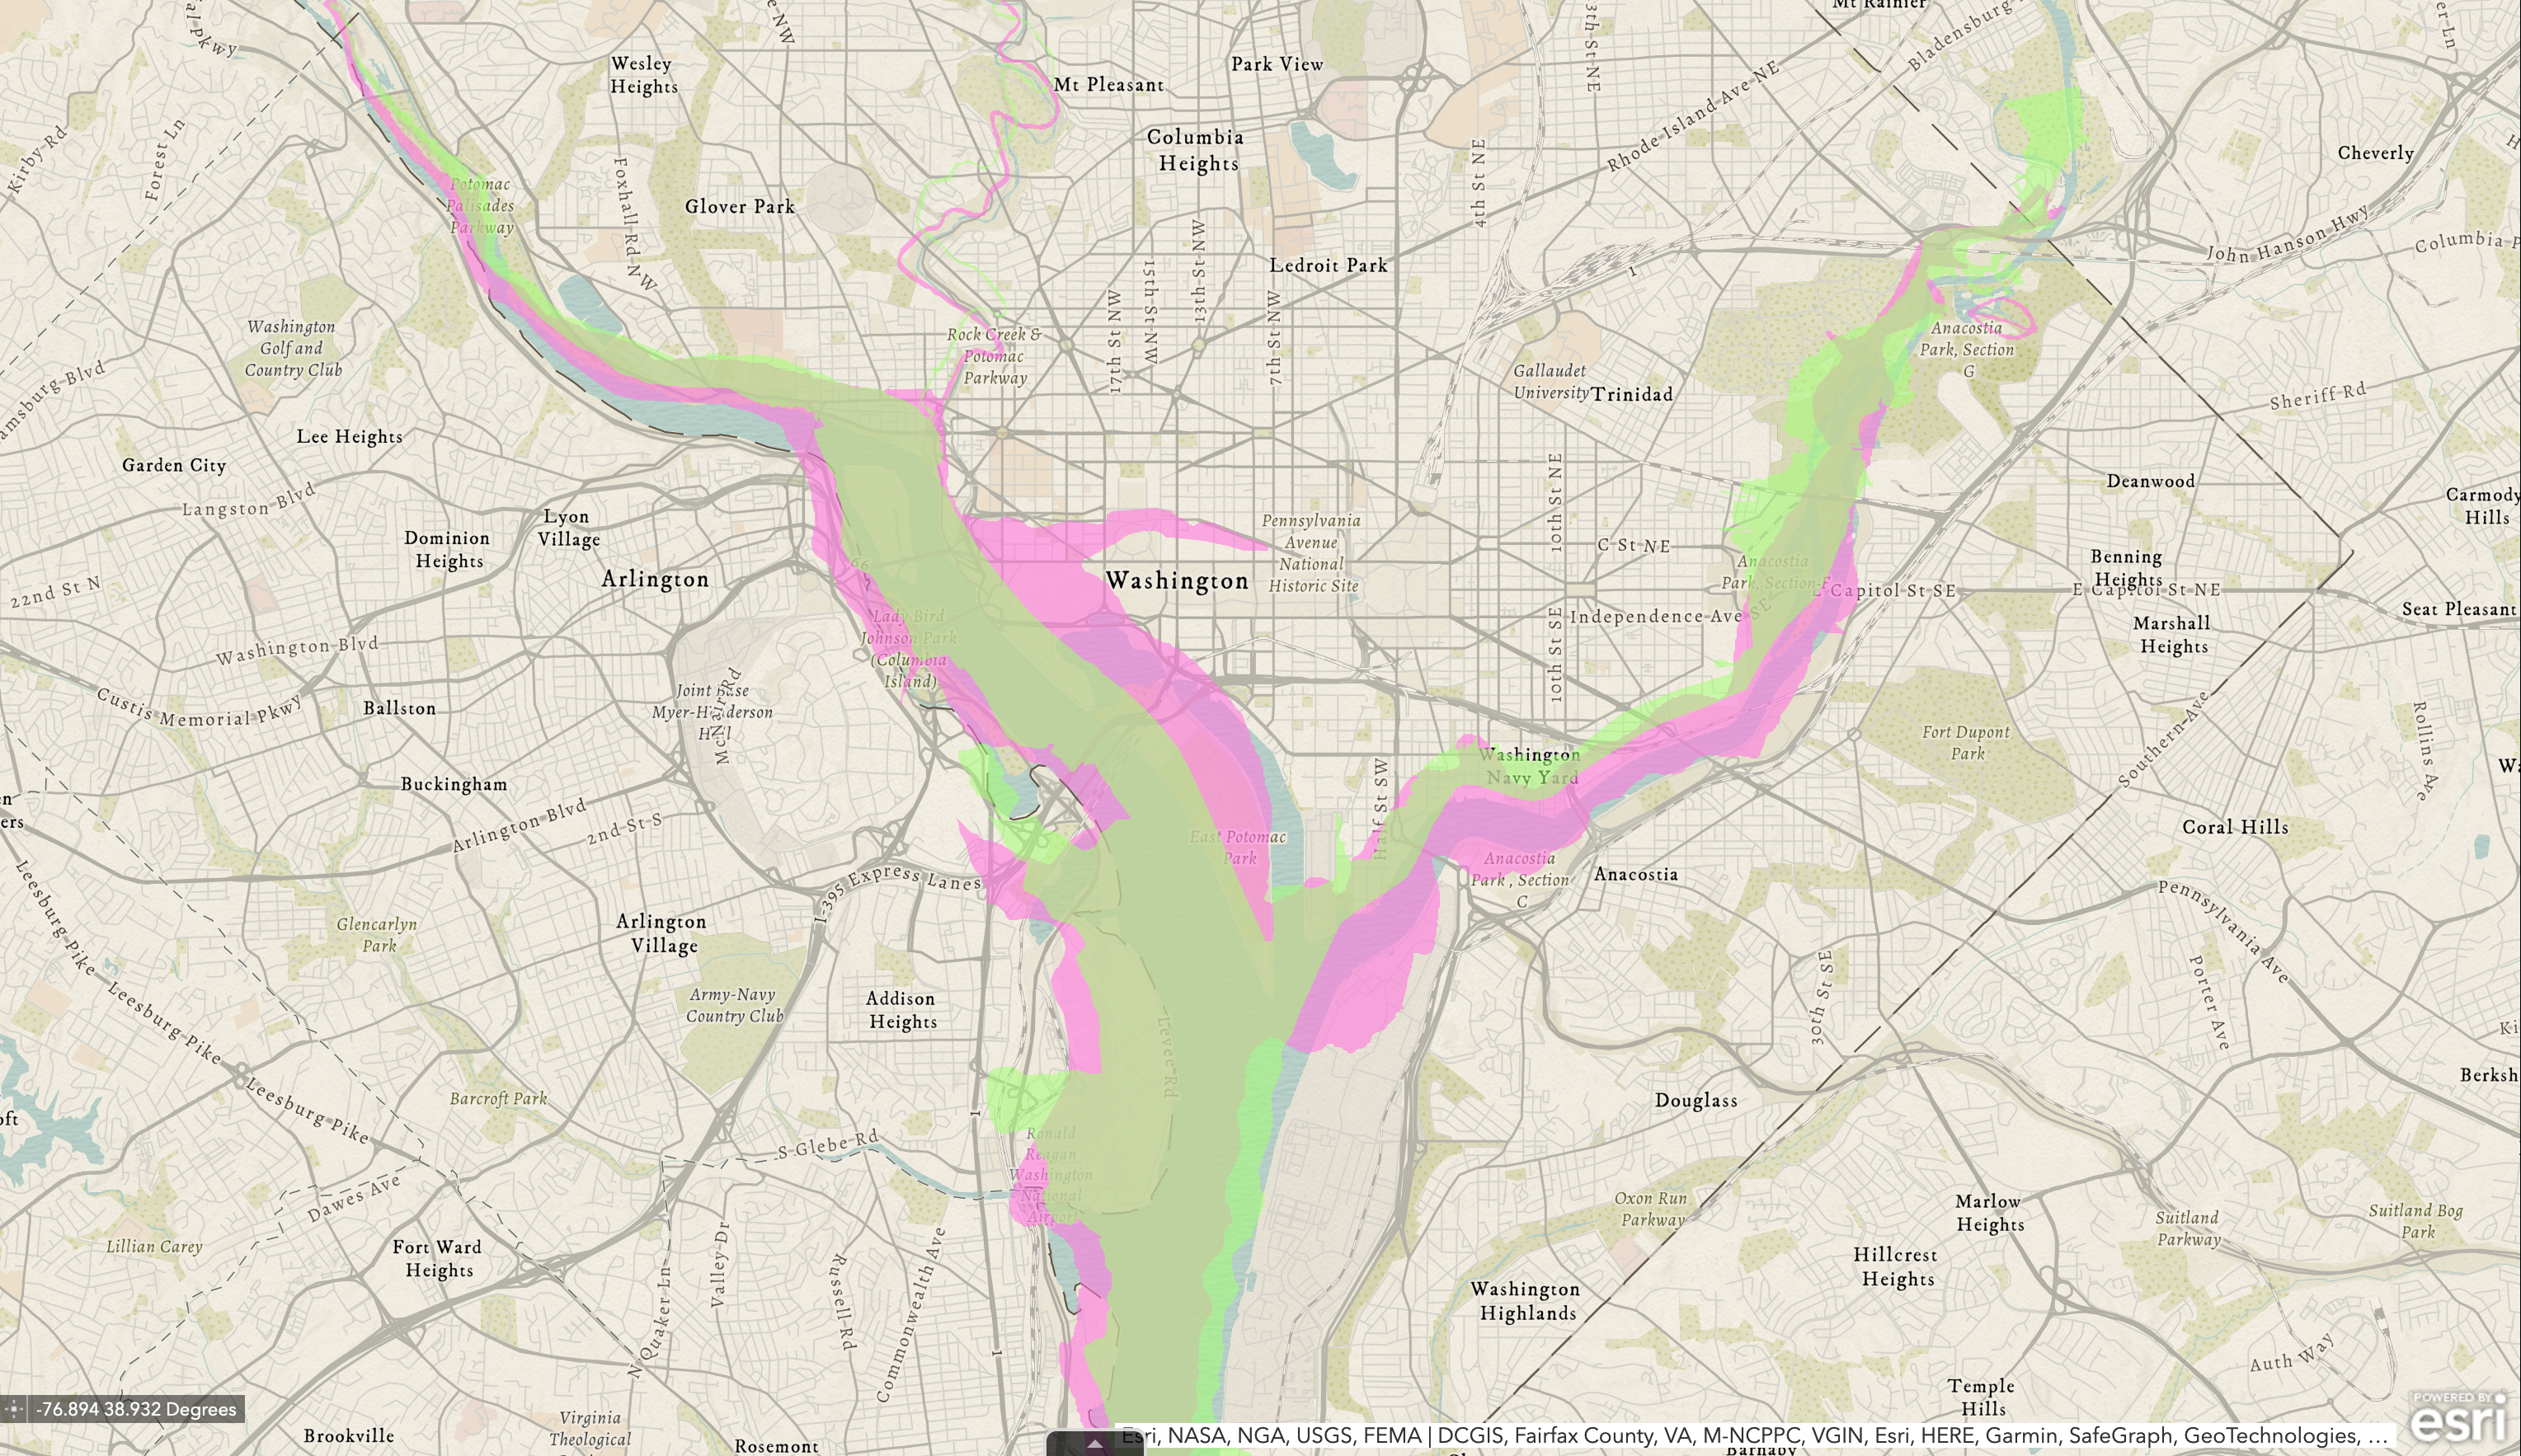 Map with pink overlay showing Potomac River as mapped by Andrew Ellicott in 1793 and a green overlay showing the river as mapped by the USGS in 1917. (Source: The District's Historical Streams, D.C. Department of Energy and Environment)